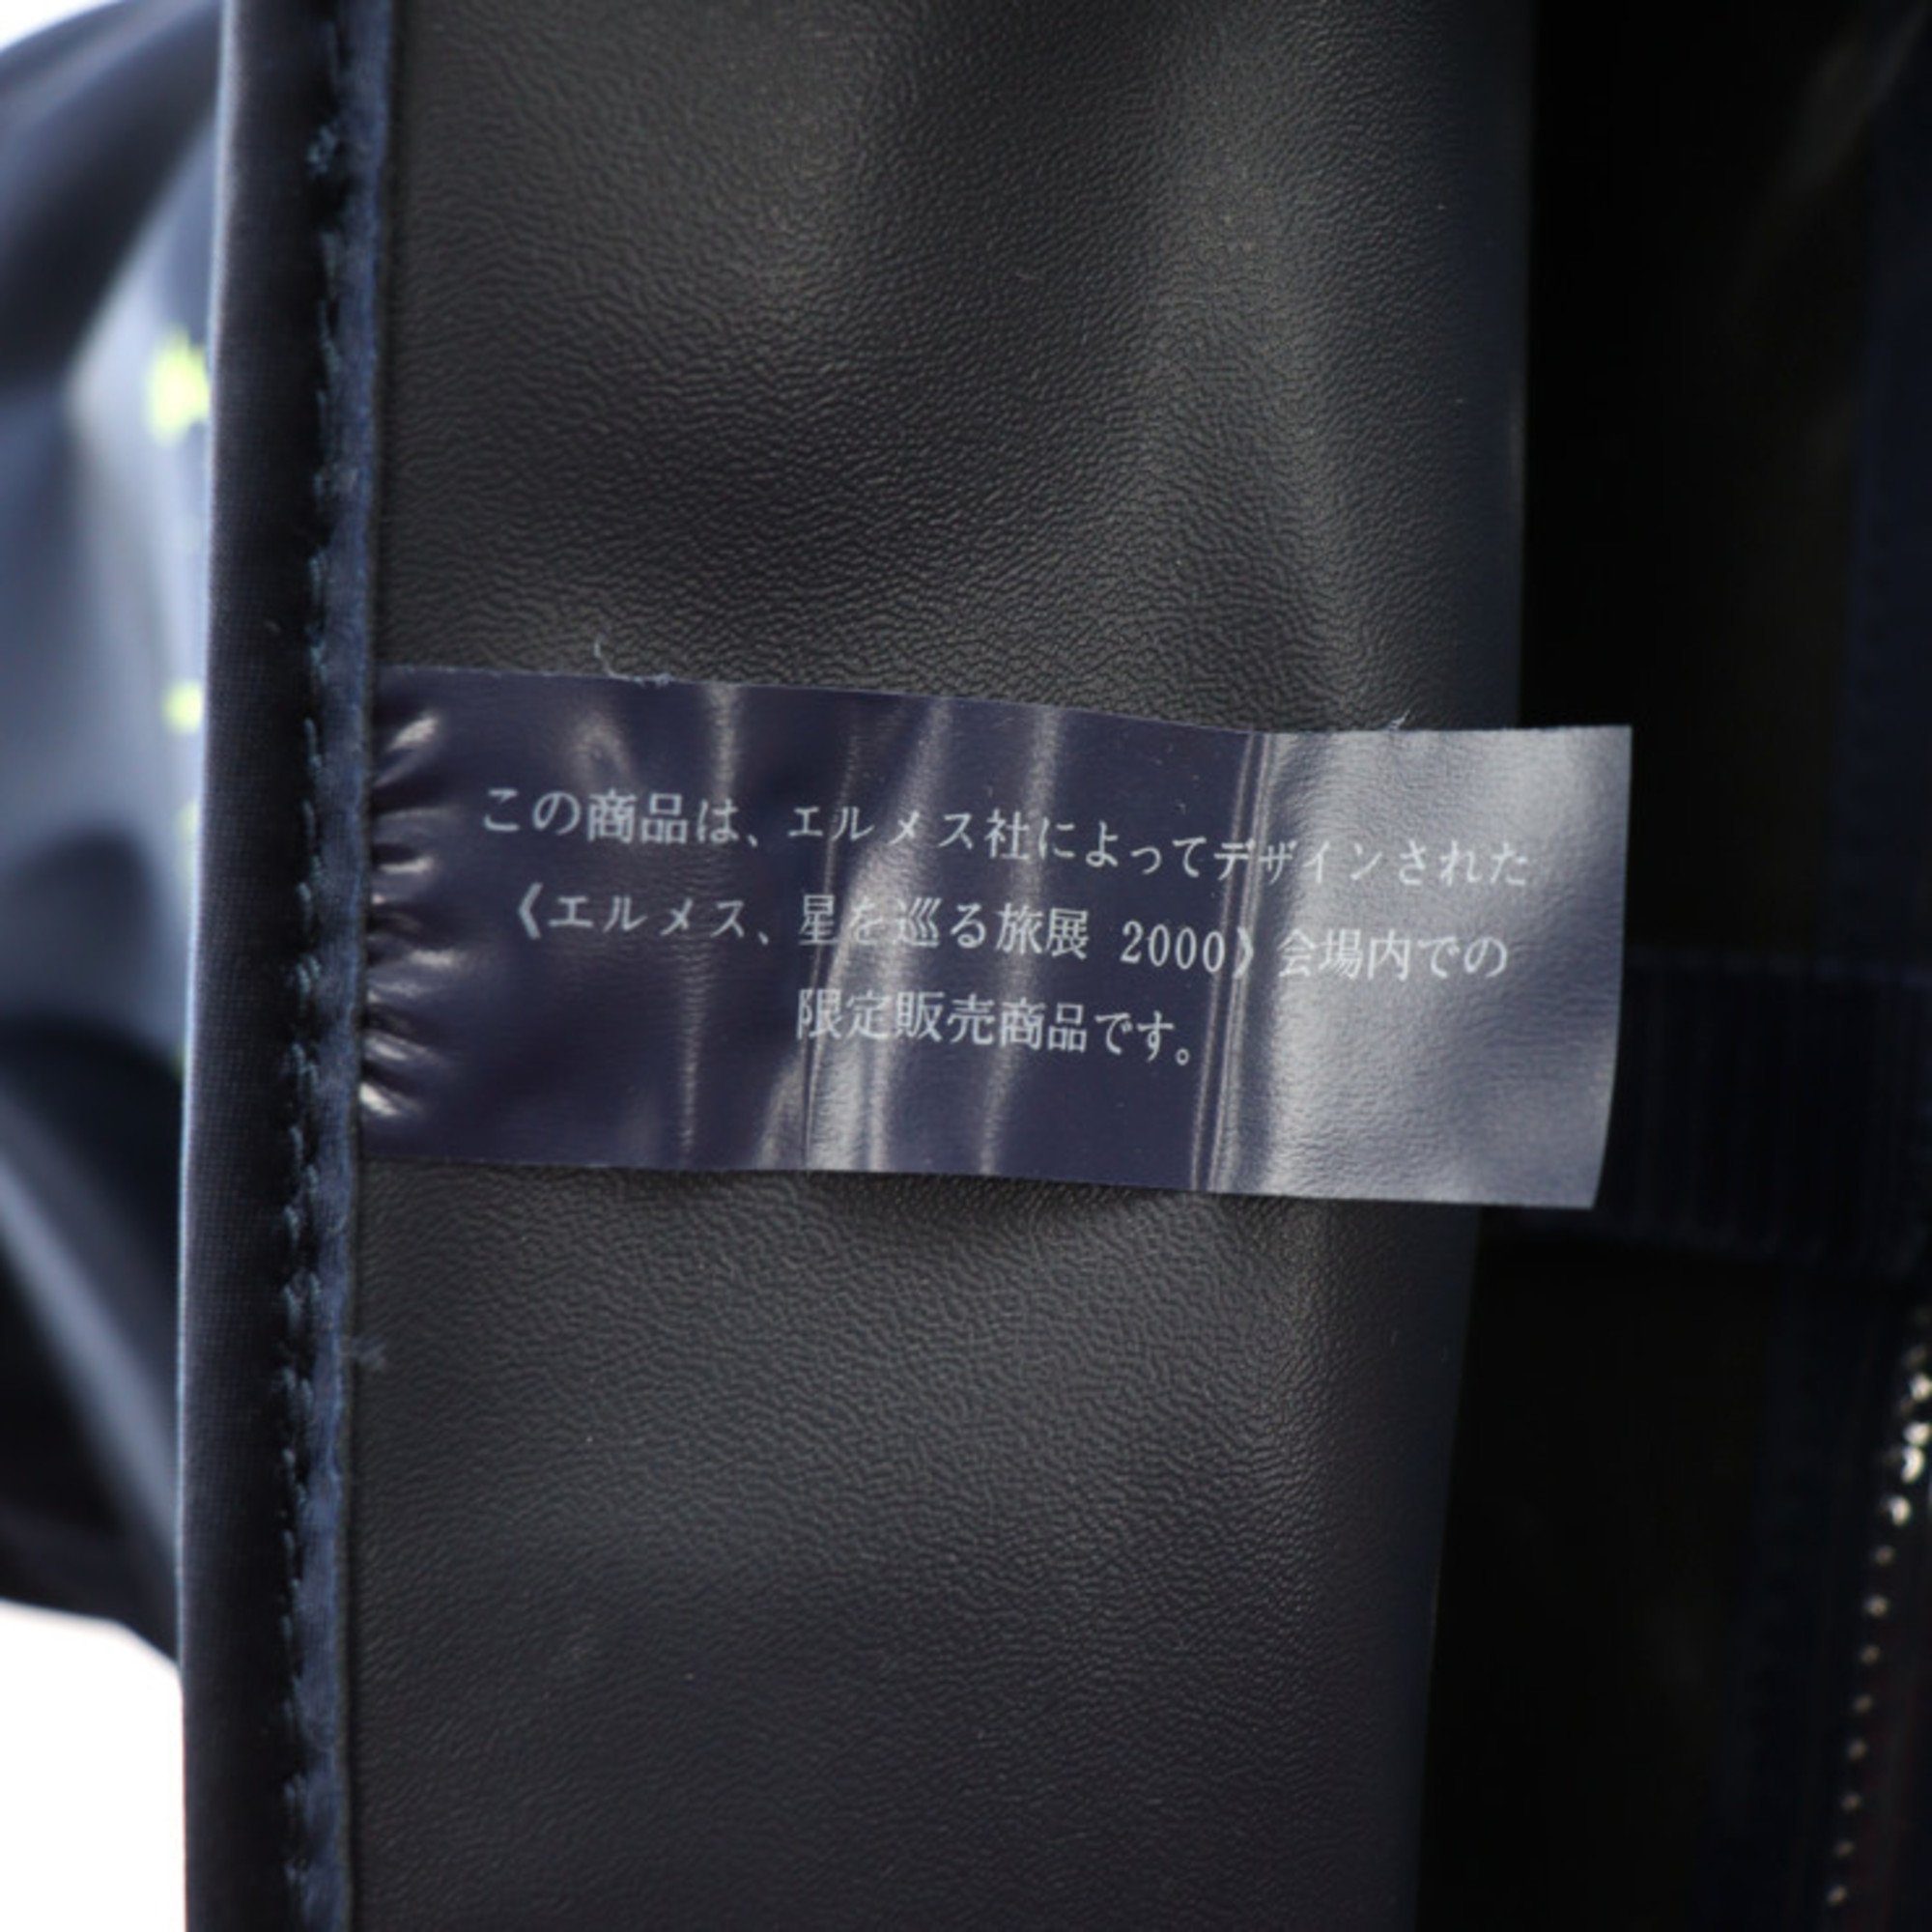 HERMES Sherpa Journey Through the Stars Exhibition 2000 Rucksack/Daypack Nylon Navy Backpack Limited Edition